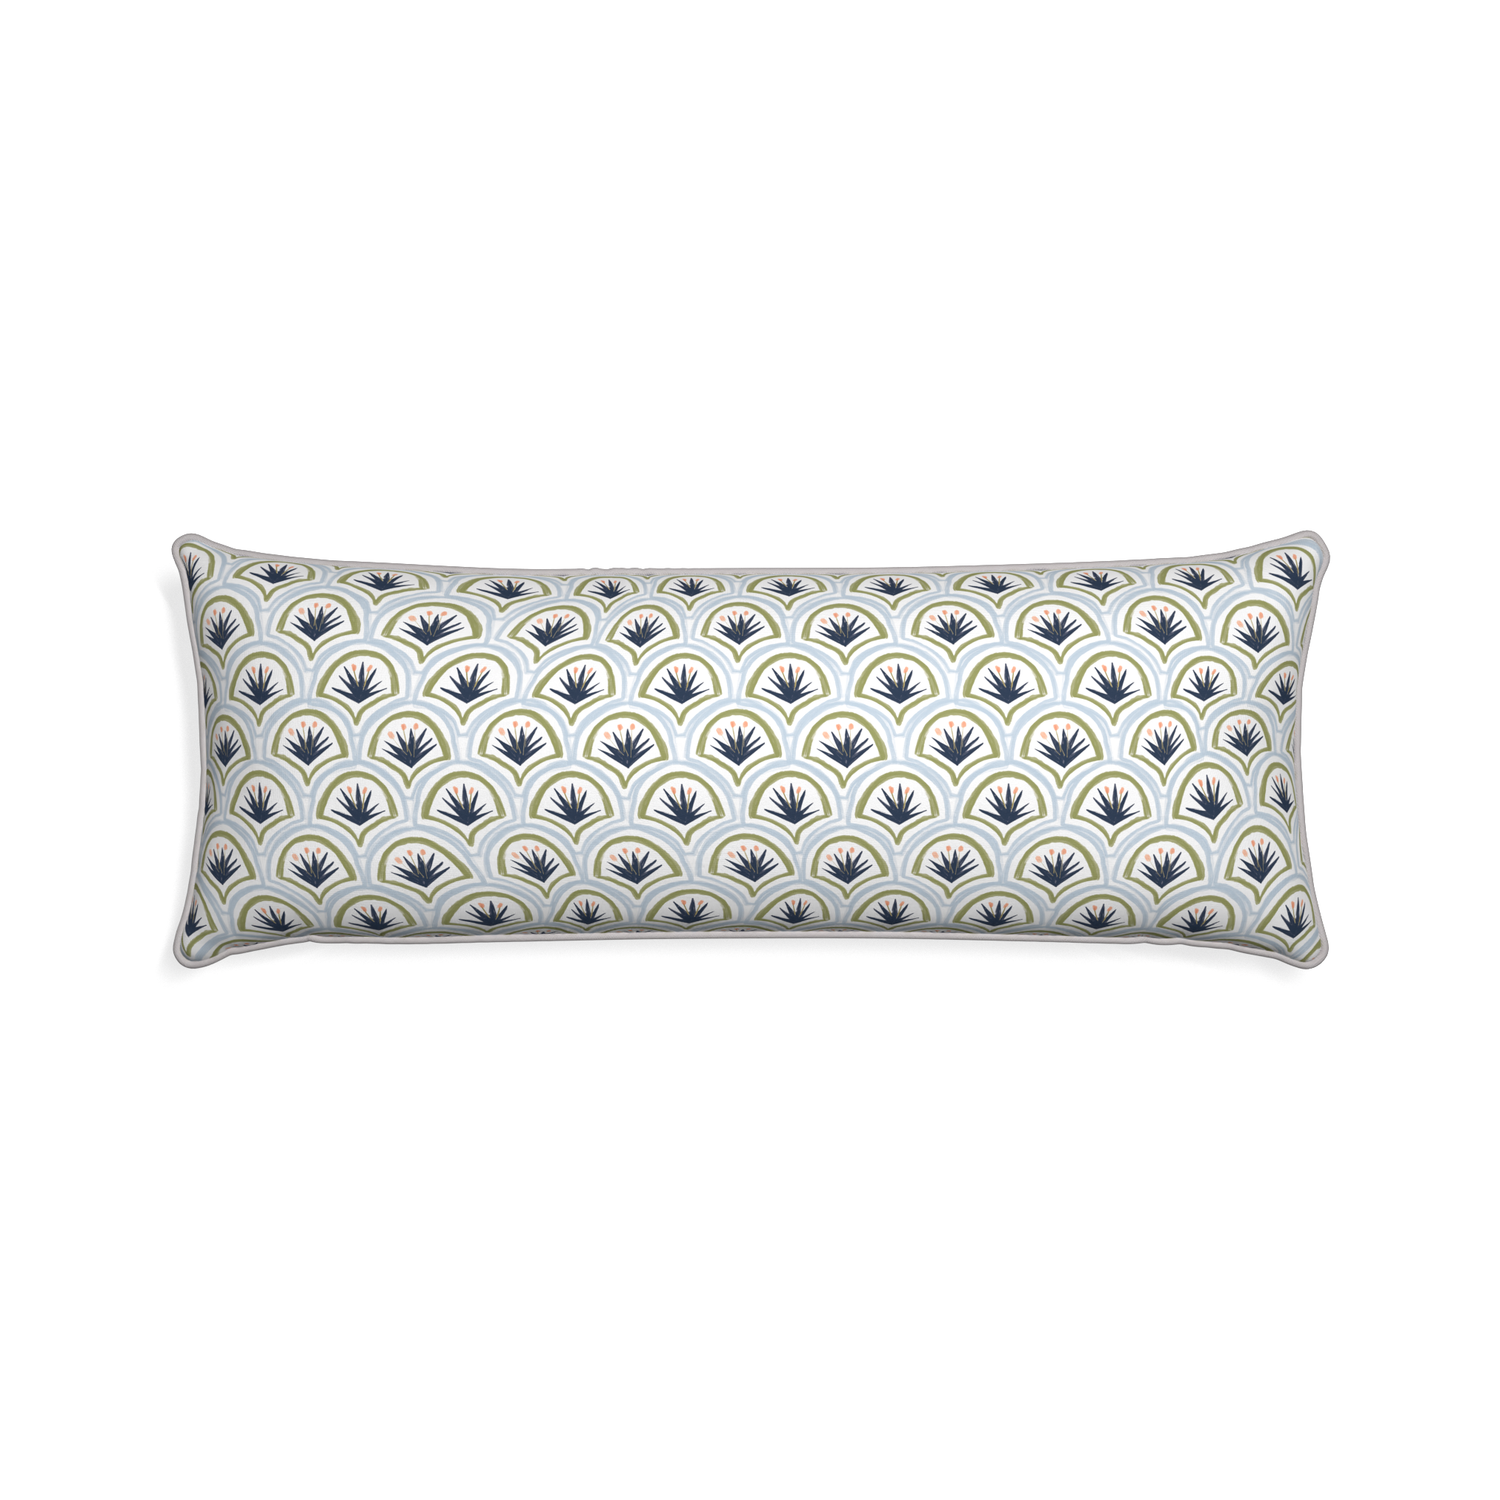 Xl-lumbar thatcher midnight custom art deco palm patternpillow with pebble piping on white background